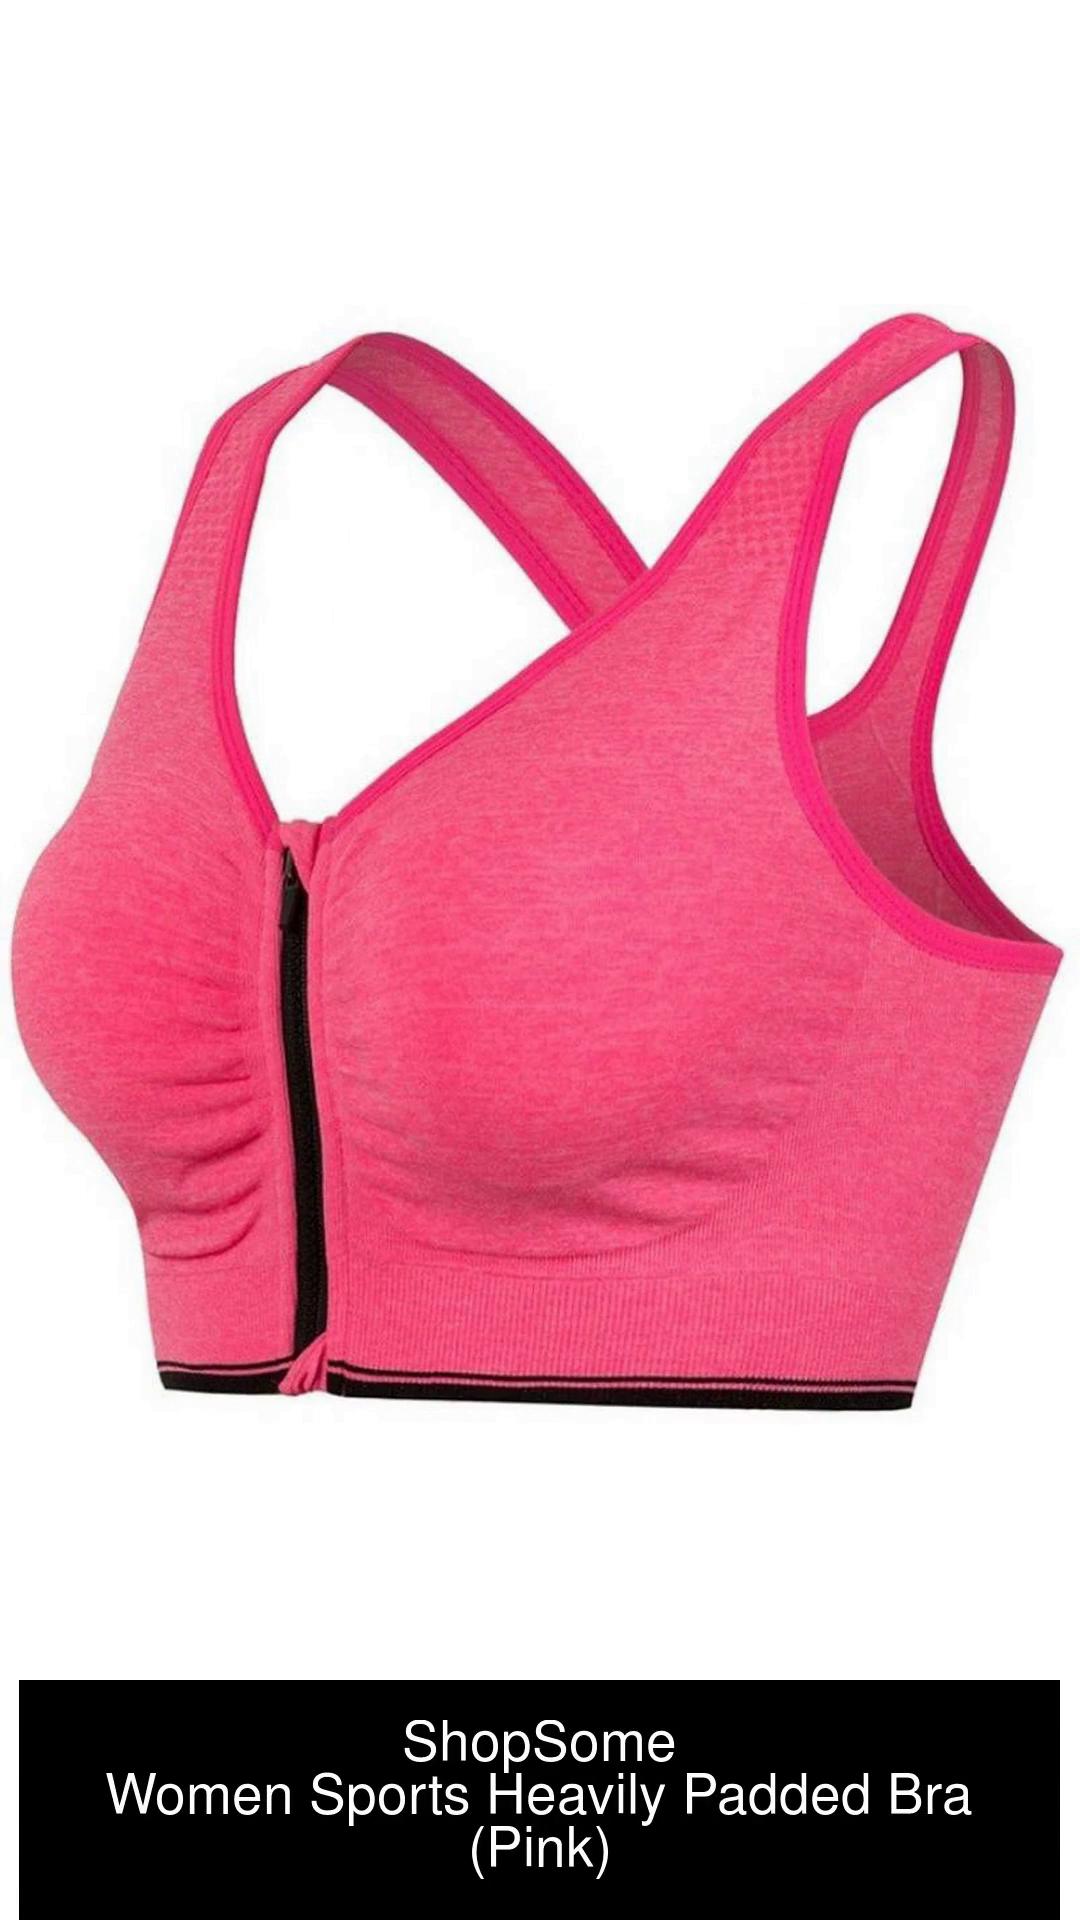 ShopSome Zipper Front Sports Bra Women Sports Heavily Padded Bra - Buy  ShopSome Zipper Front Sports Bra Women Sports Heavily Padded Bra Online at  Best Prices in India